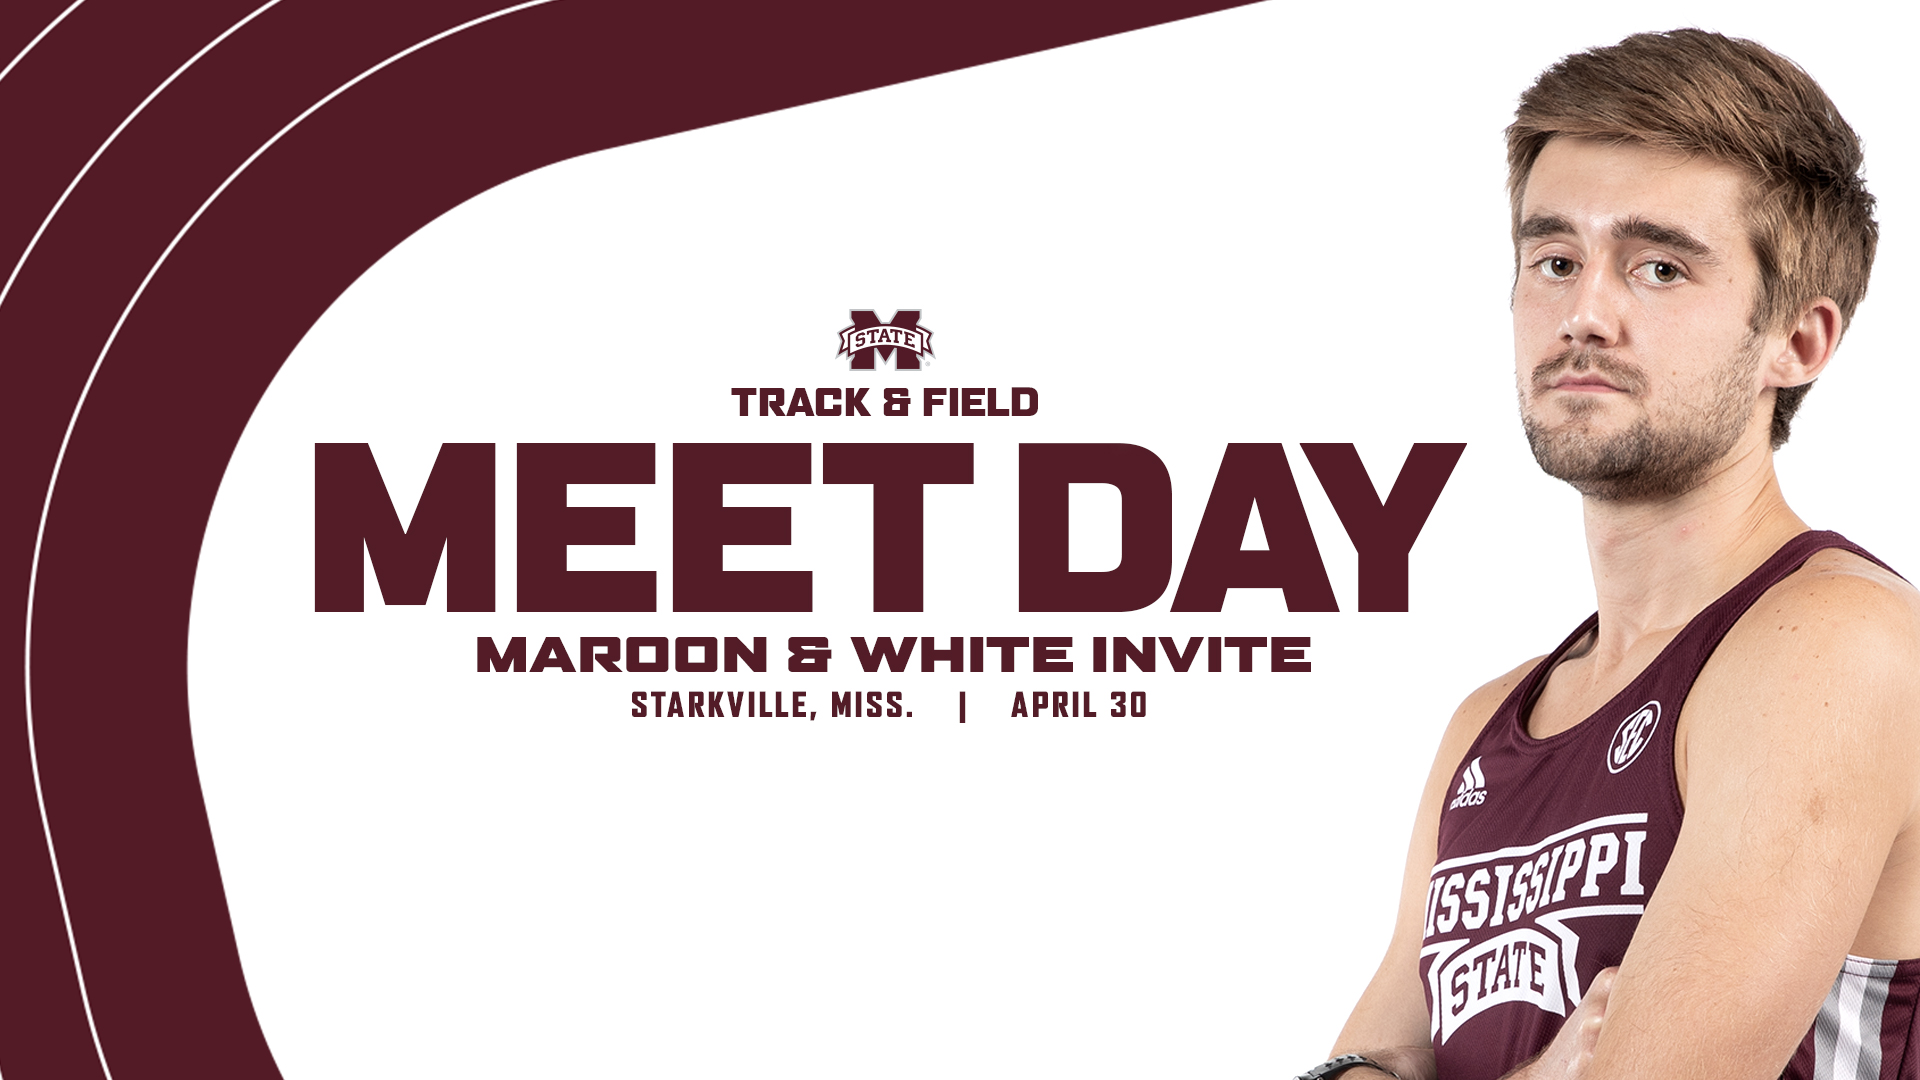 Maroon and White Invite graphic with an image of MSU distance runner Chandler Underwood